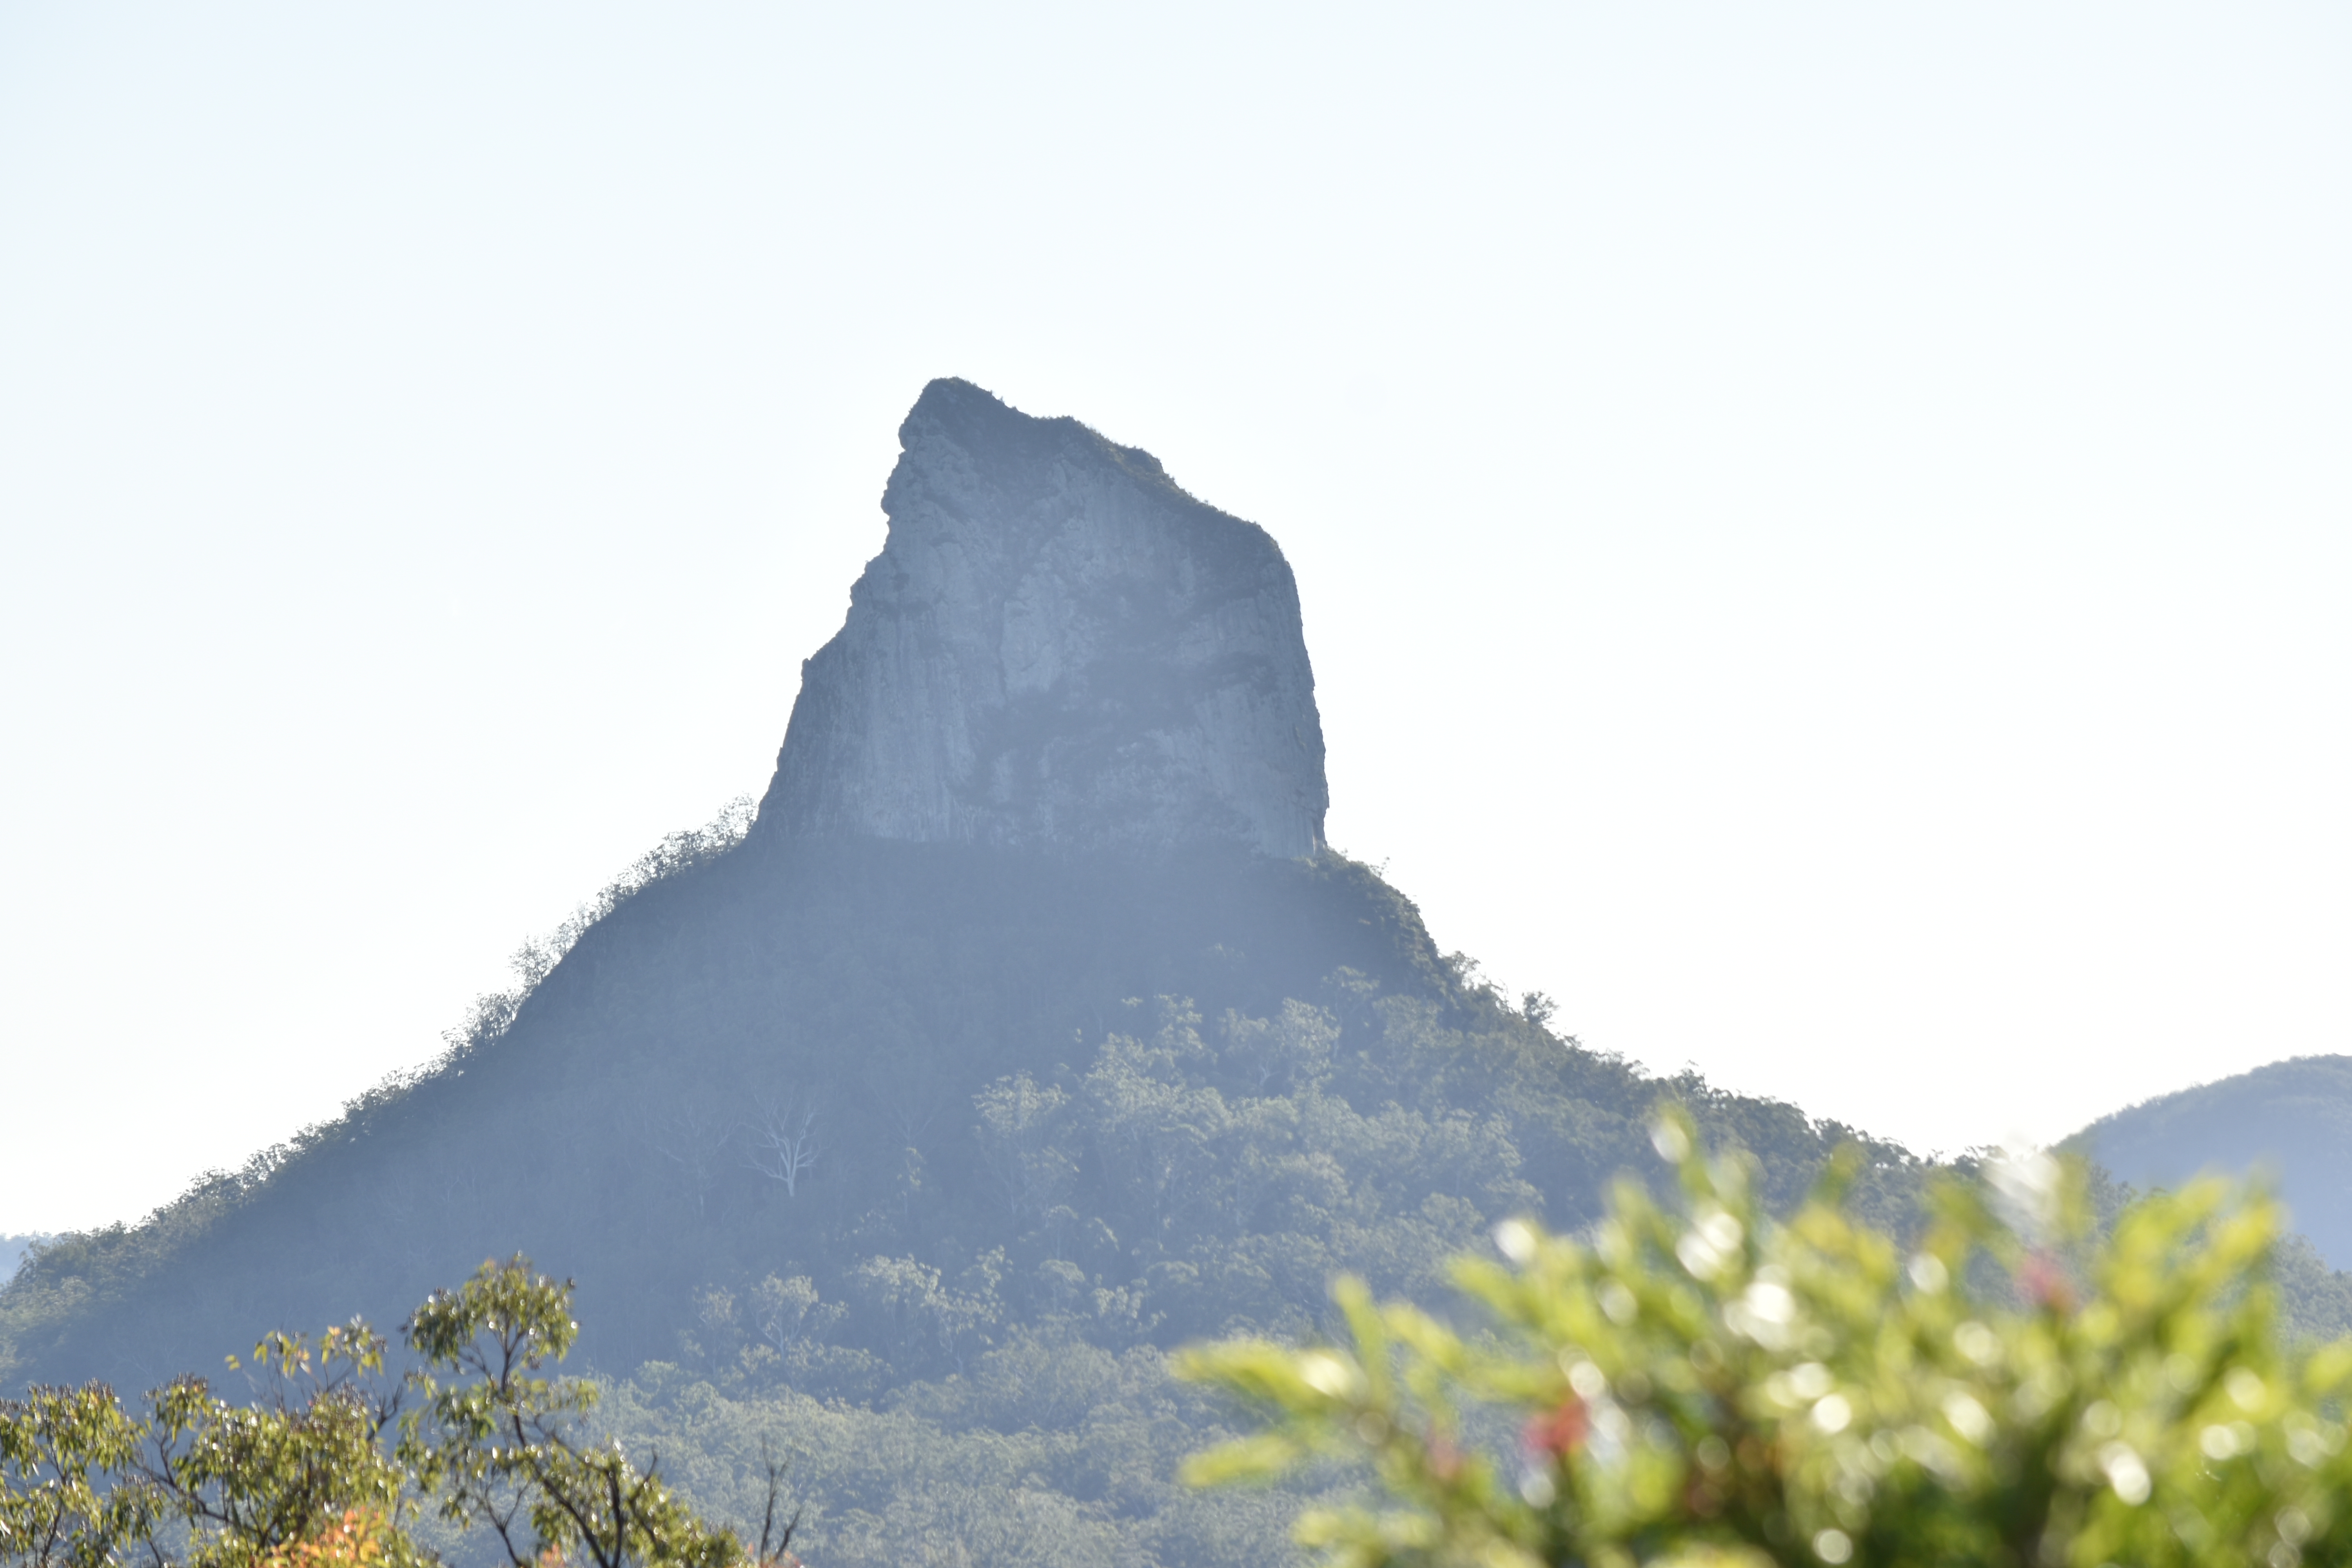 Mount Coonowrin